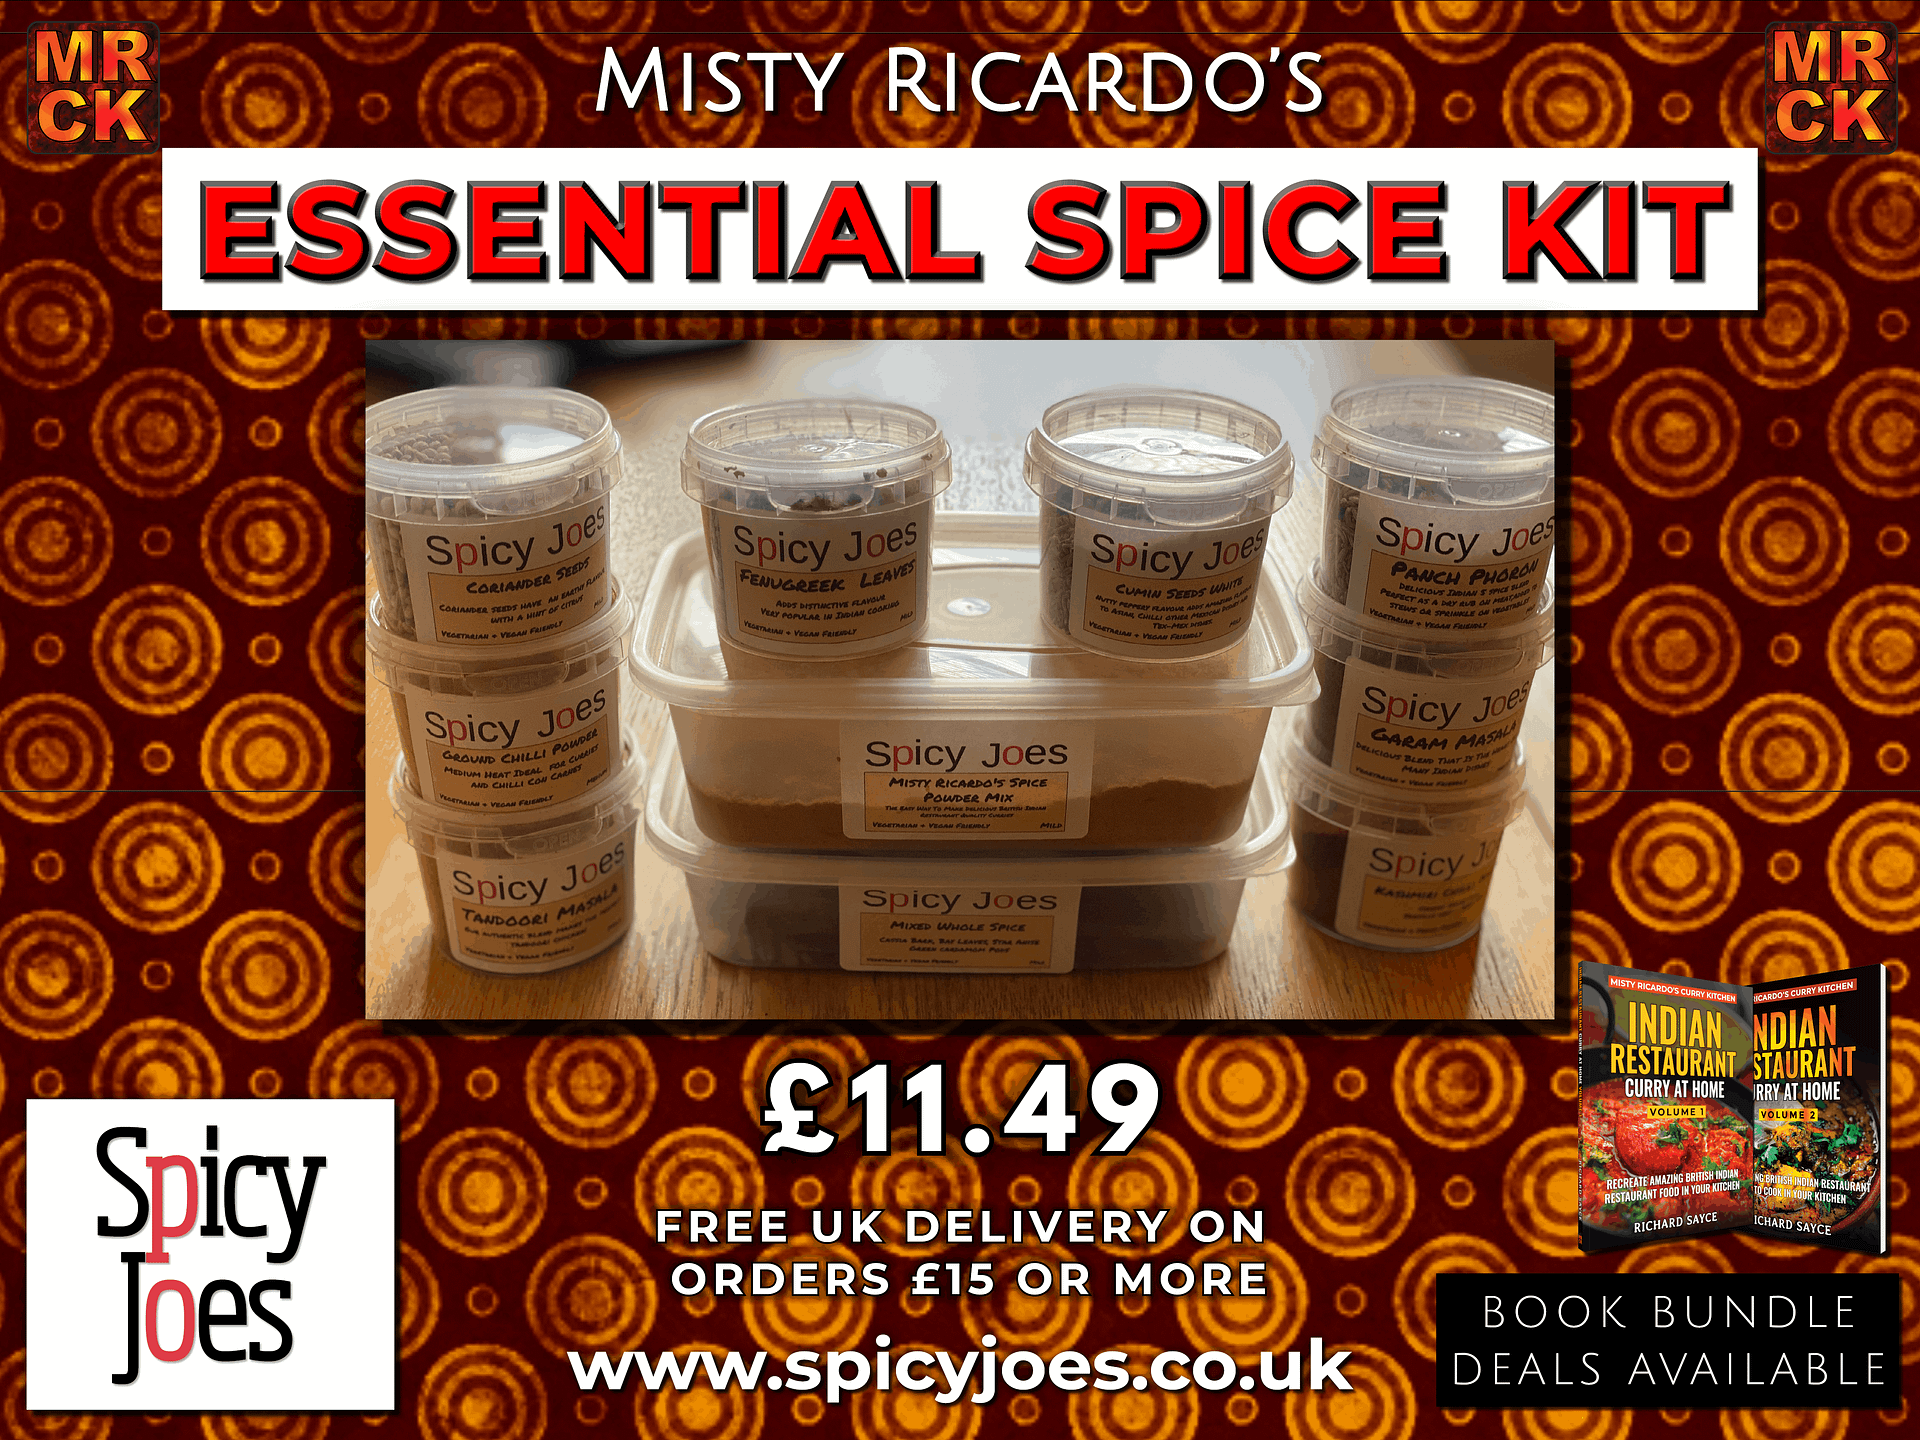 Misty Ricardo's Essential Spice Kit from Spicy Joes